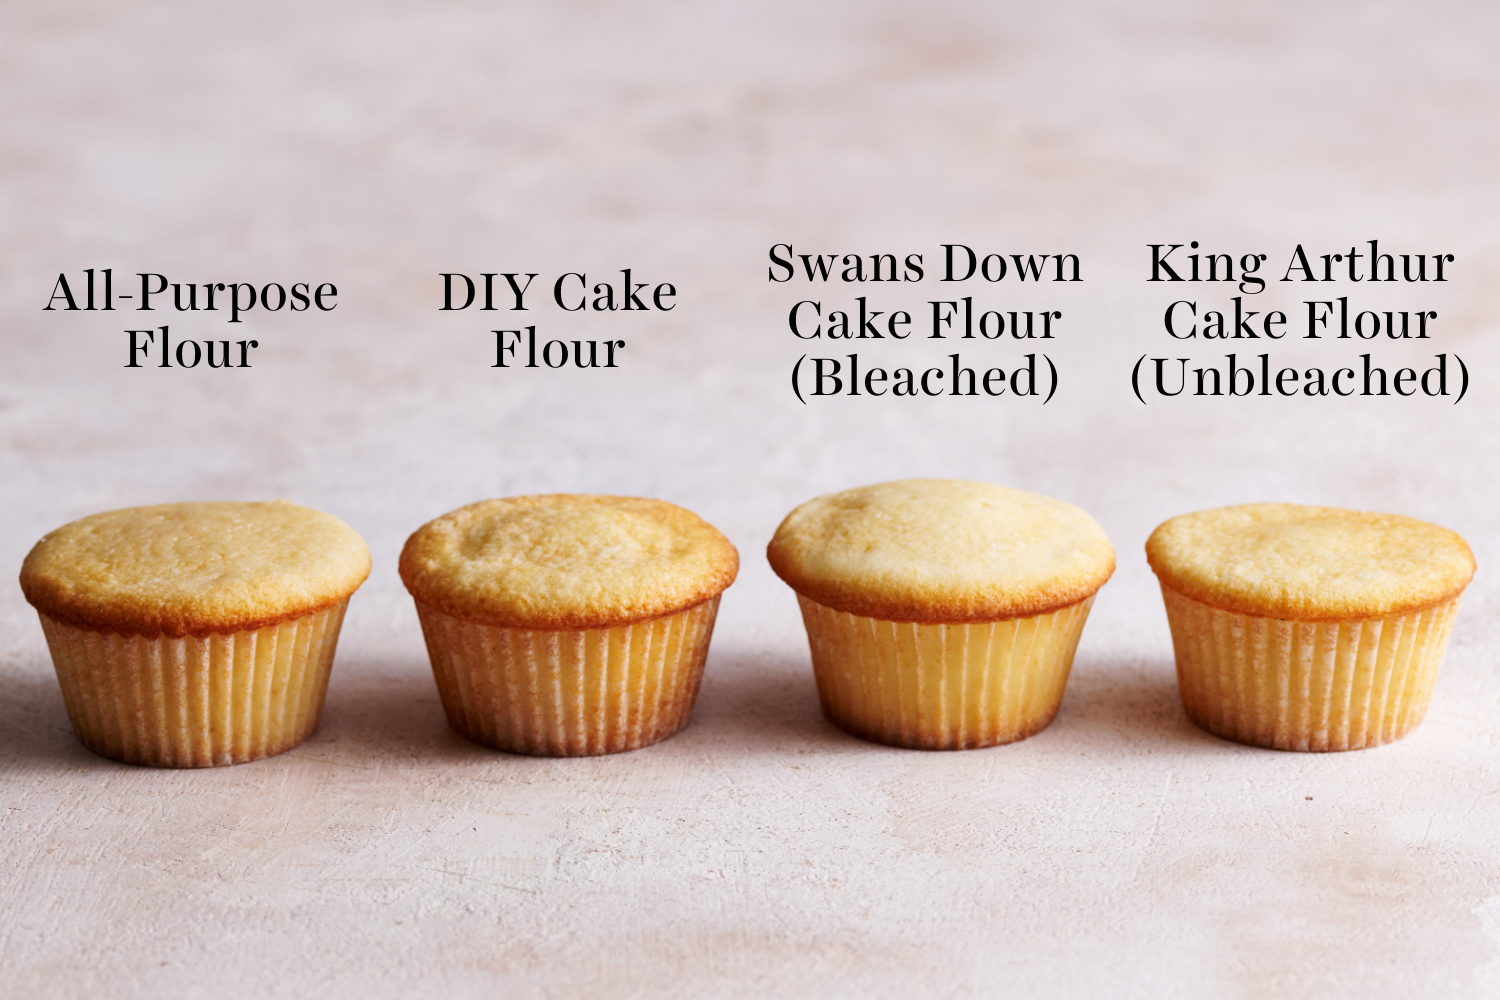 lineup of each test cupcake from above, side-by-side.